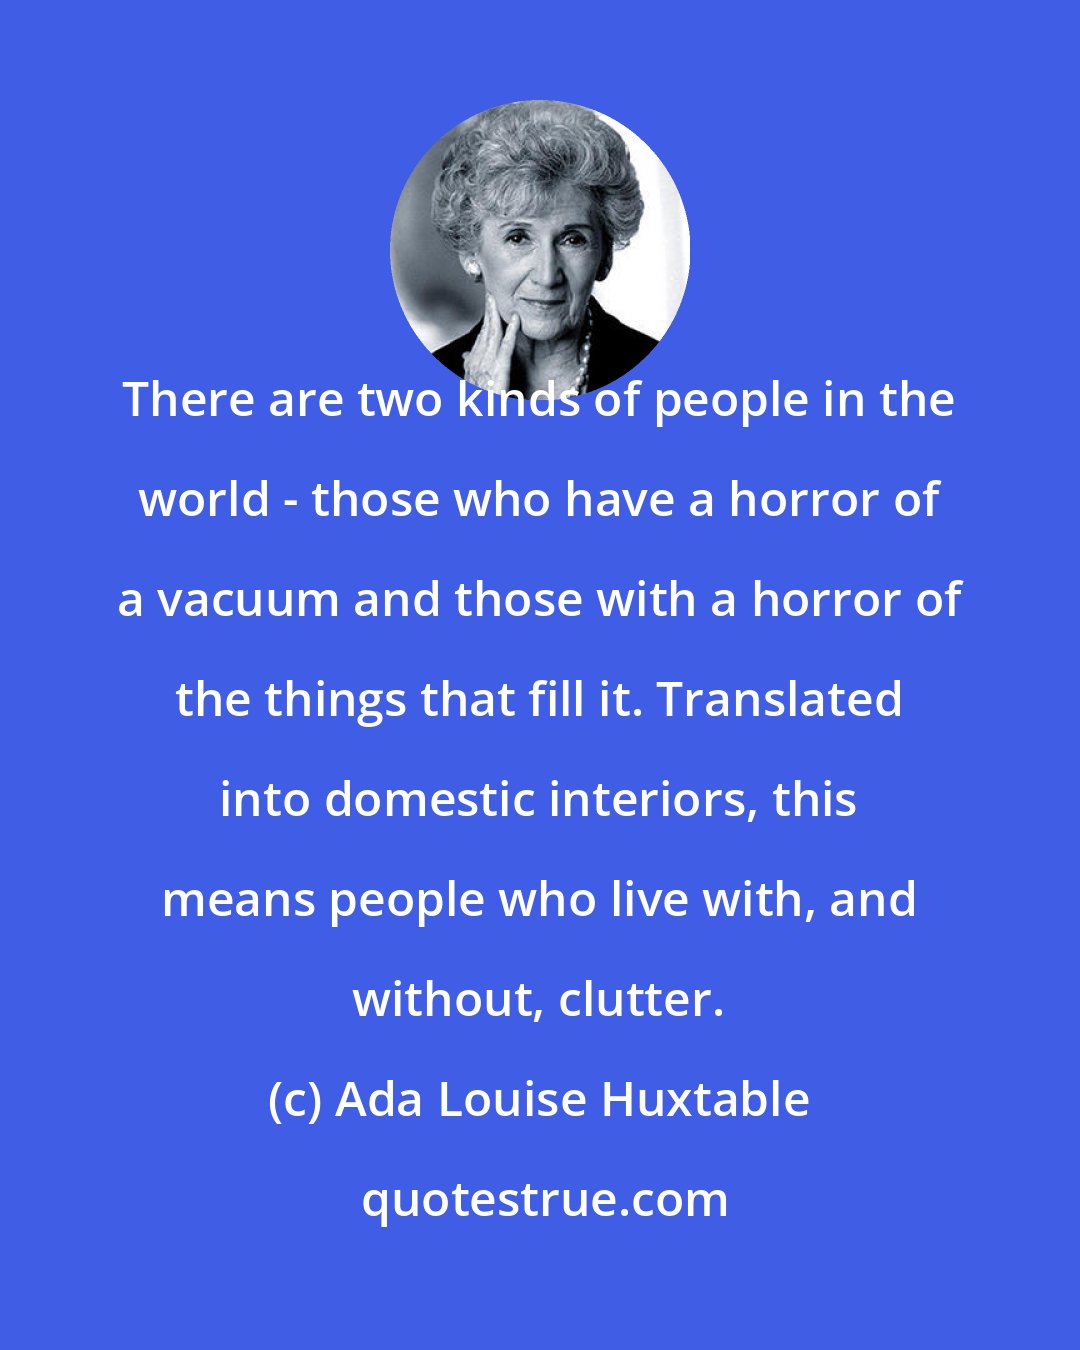 Ada Louise Huxtable: There are two kinds of people in the world - those who have a horror of a vacuum and those with a horror of the things that fill it. Translated into domestic interiors, this means people who live with, and without, clutter.